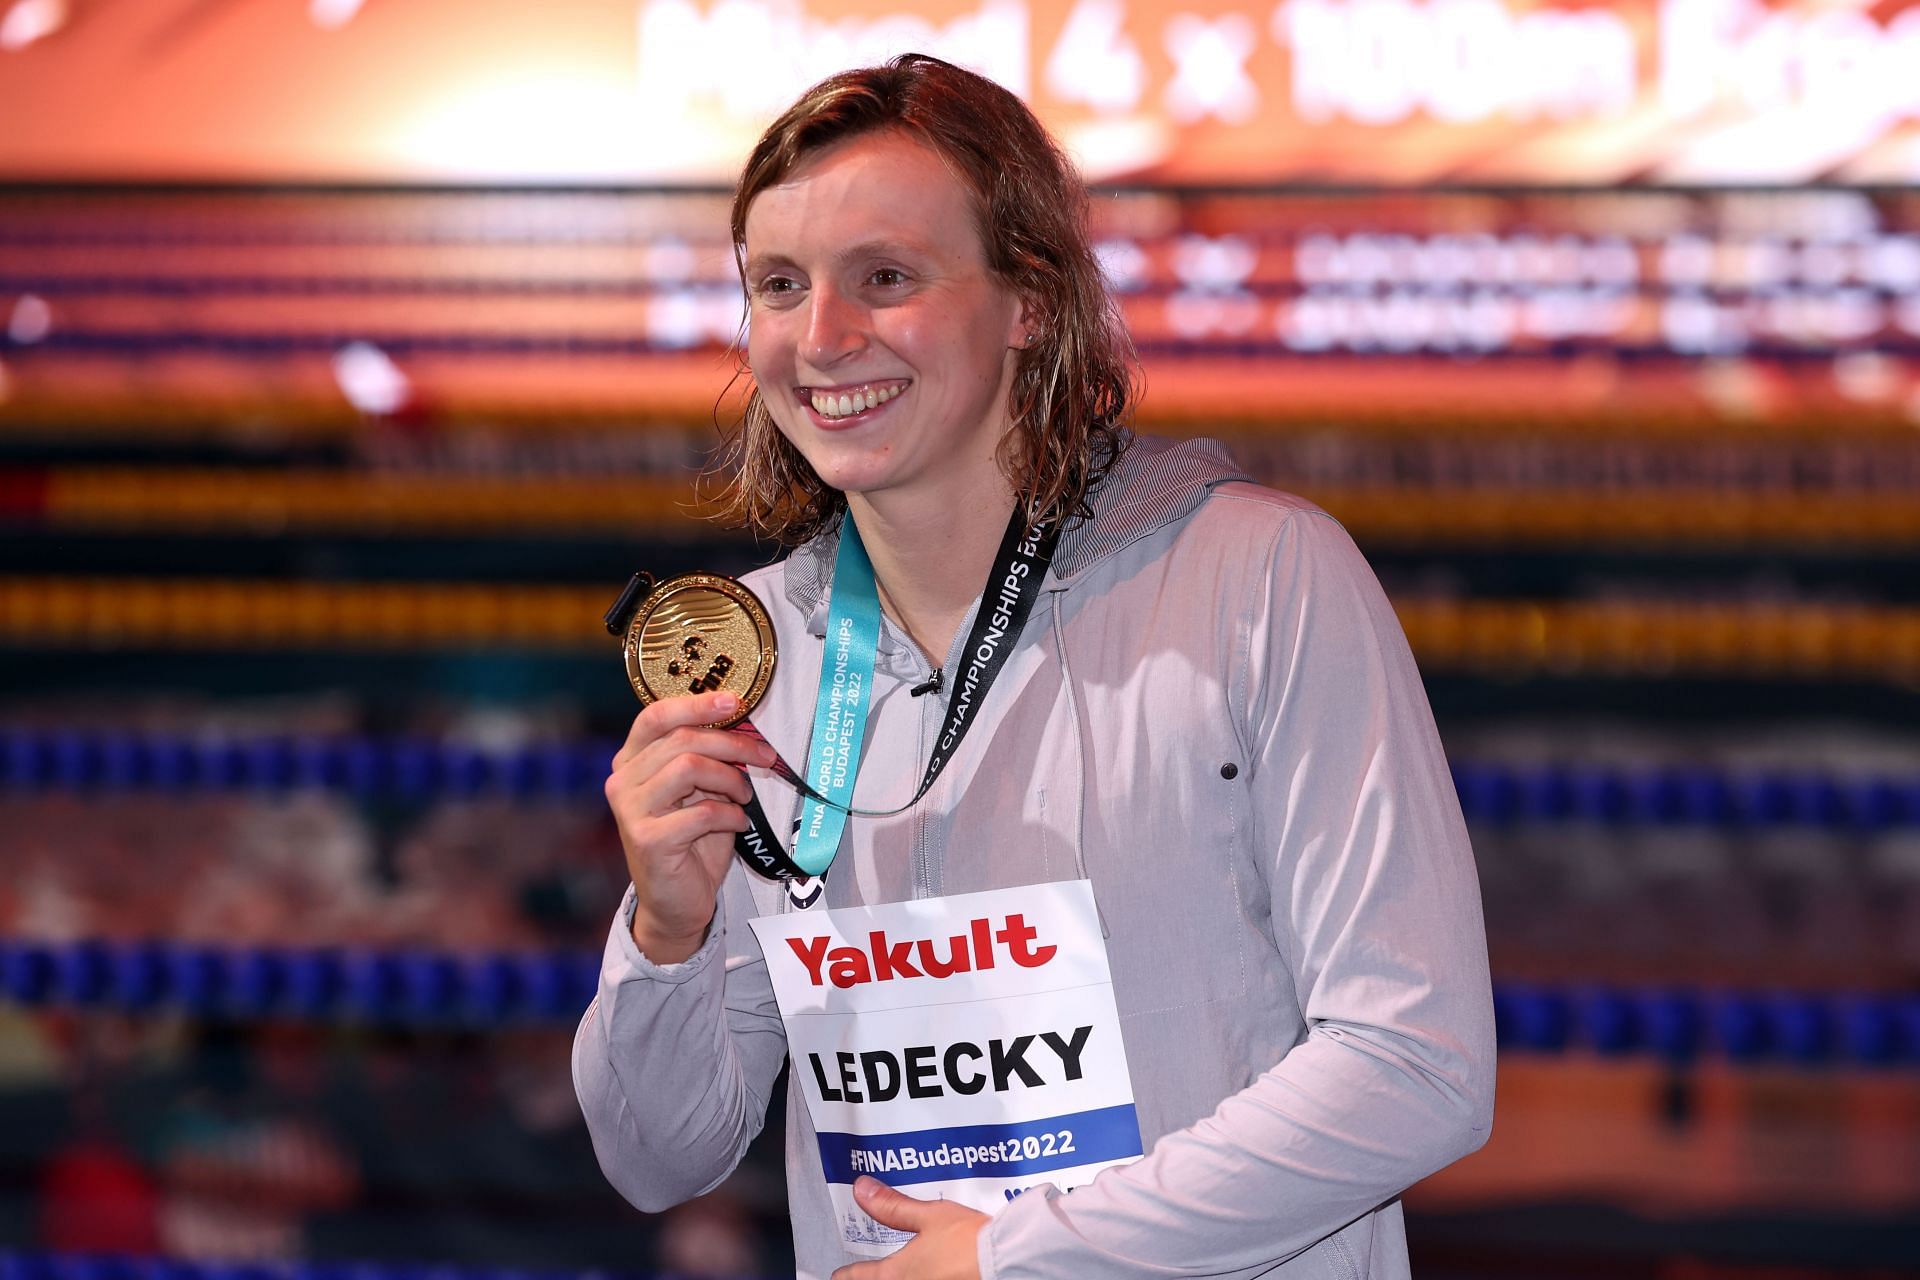 Katie Ledecky poses with the gold medal after winning the 800-meter freestyle at 2022 FINA World Championships